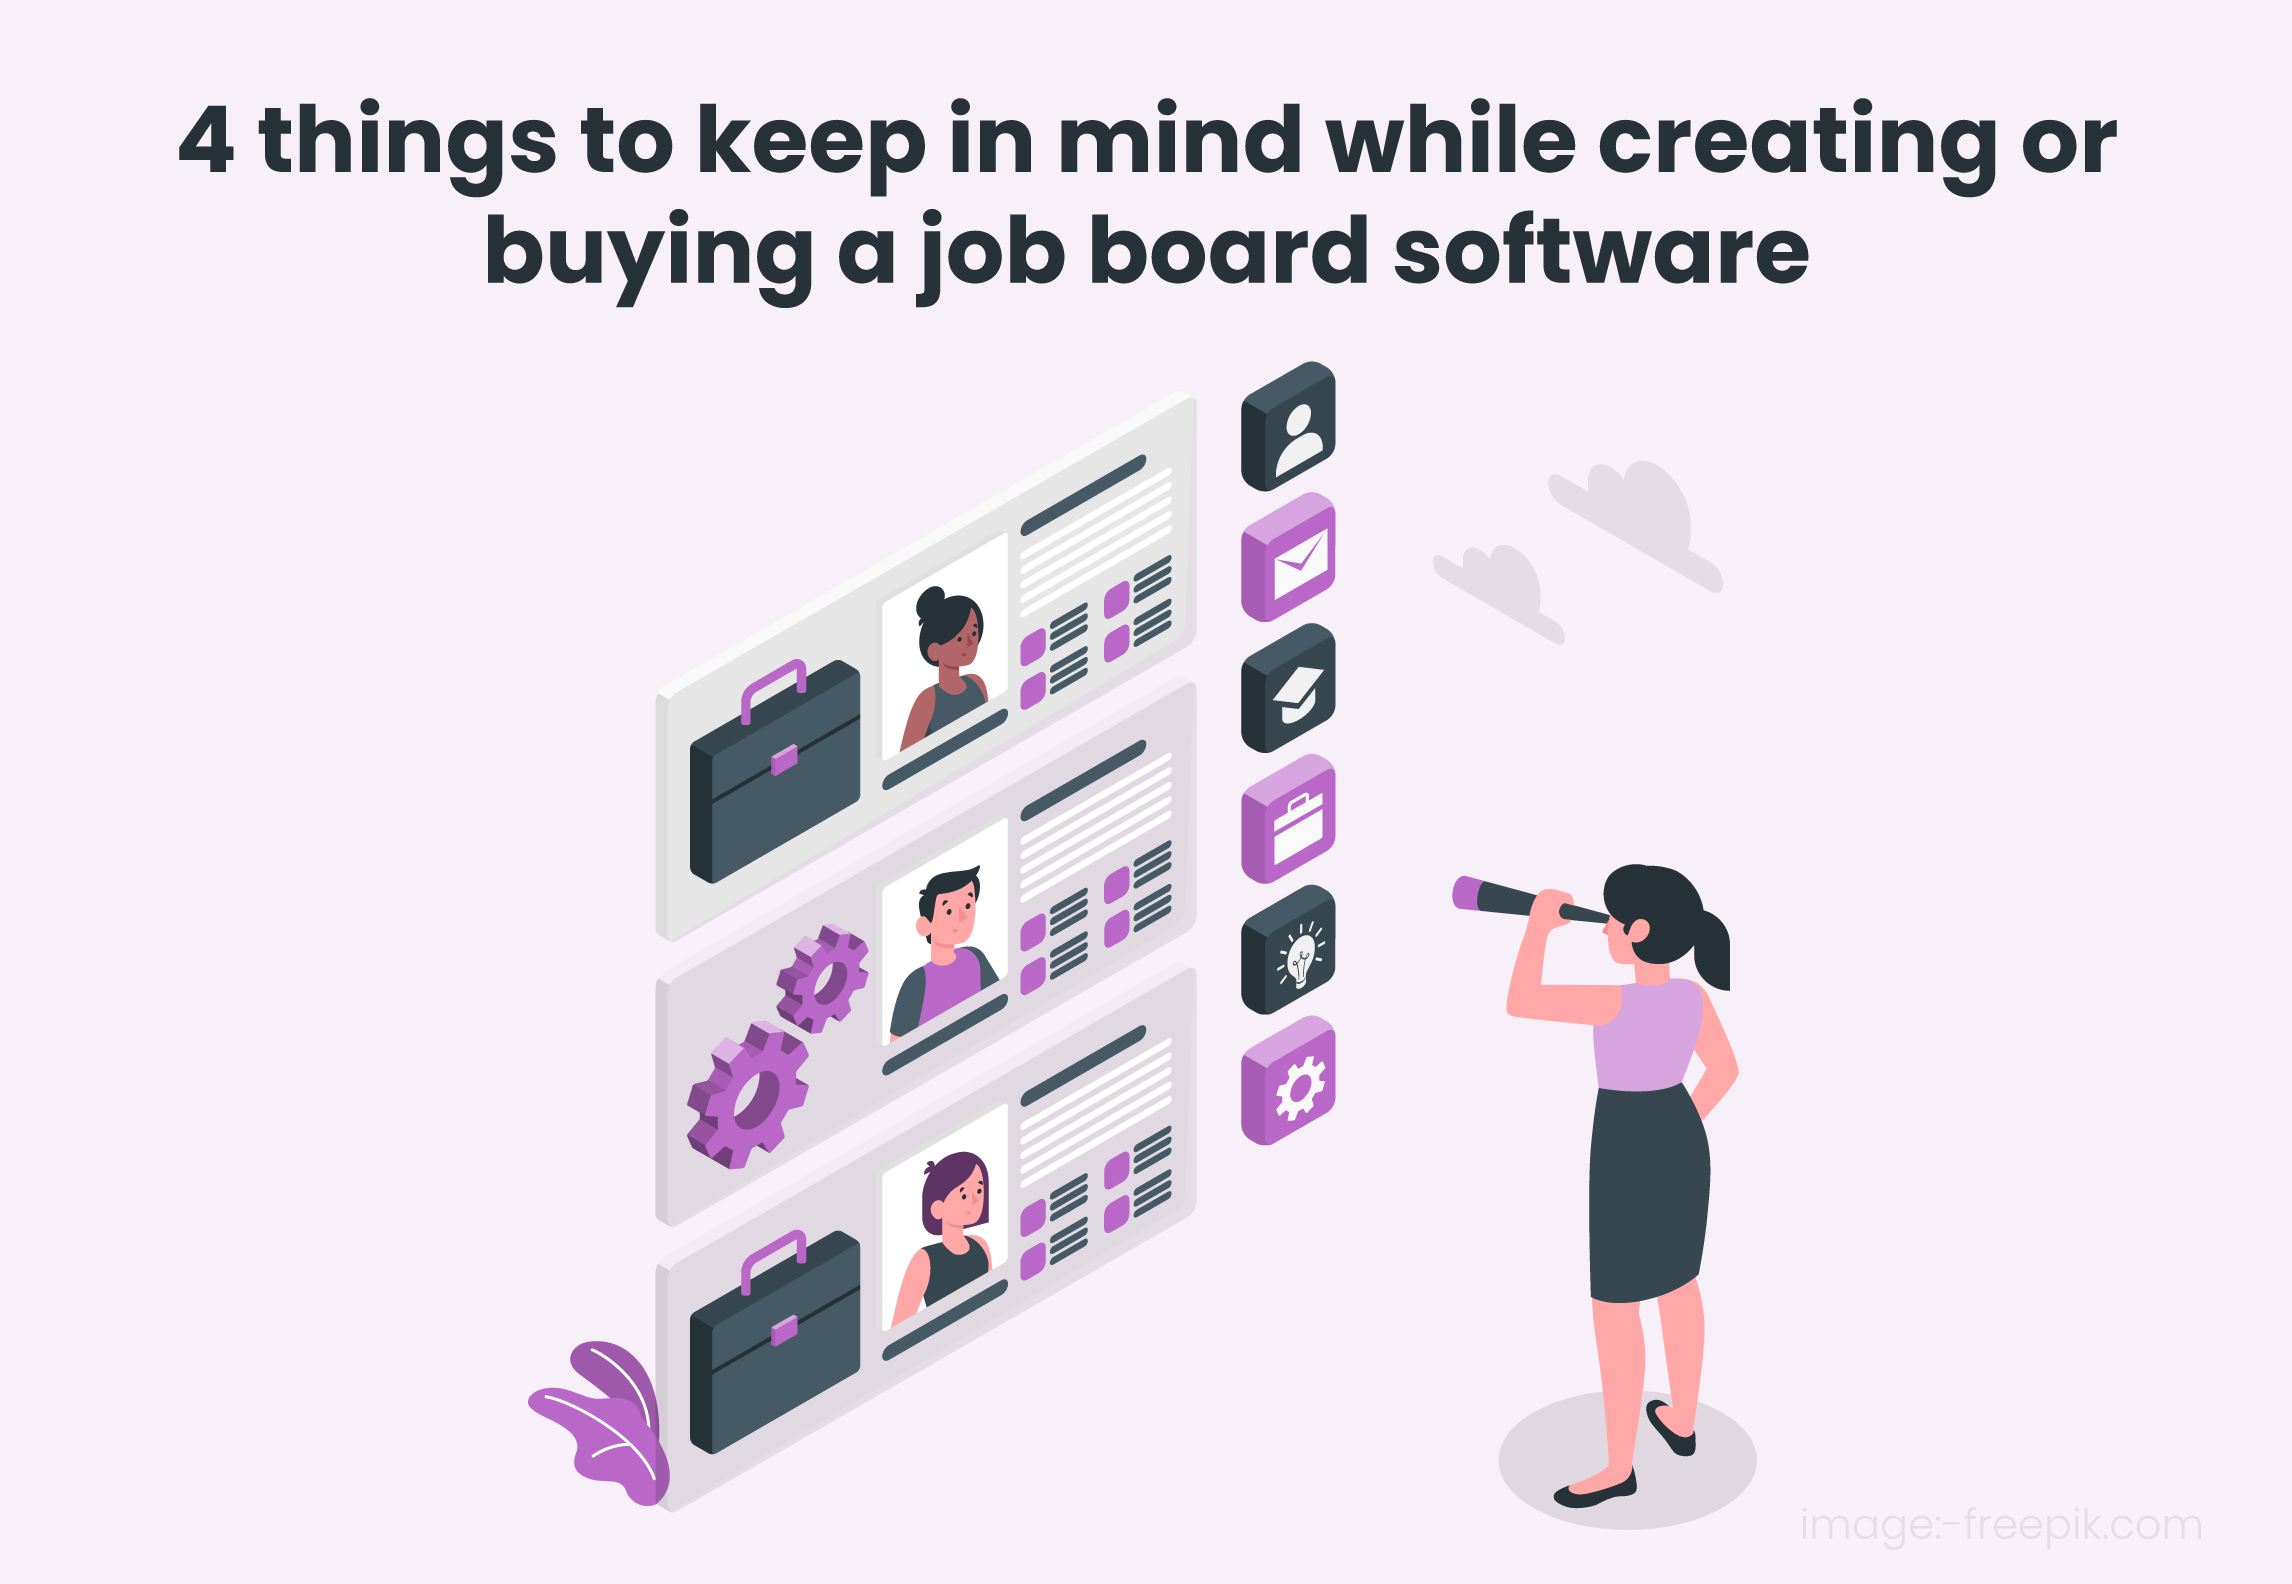 4 things to keep in mind while creating or buying a job board software